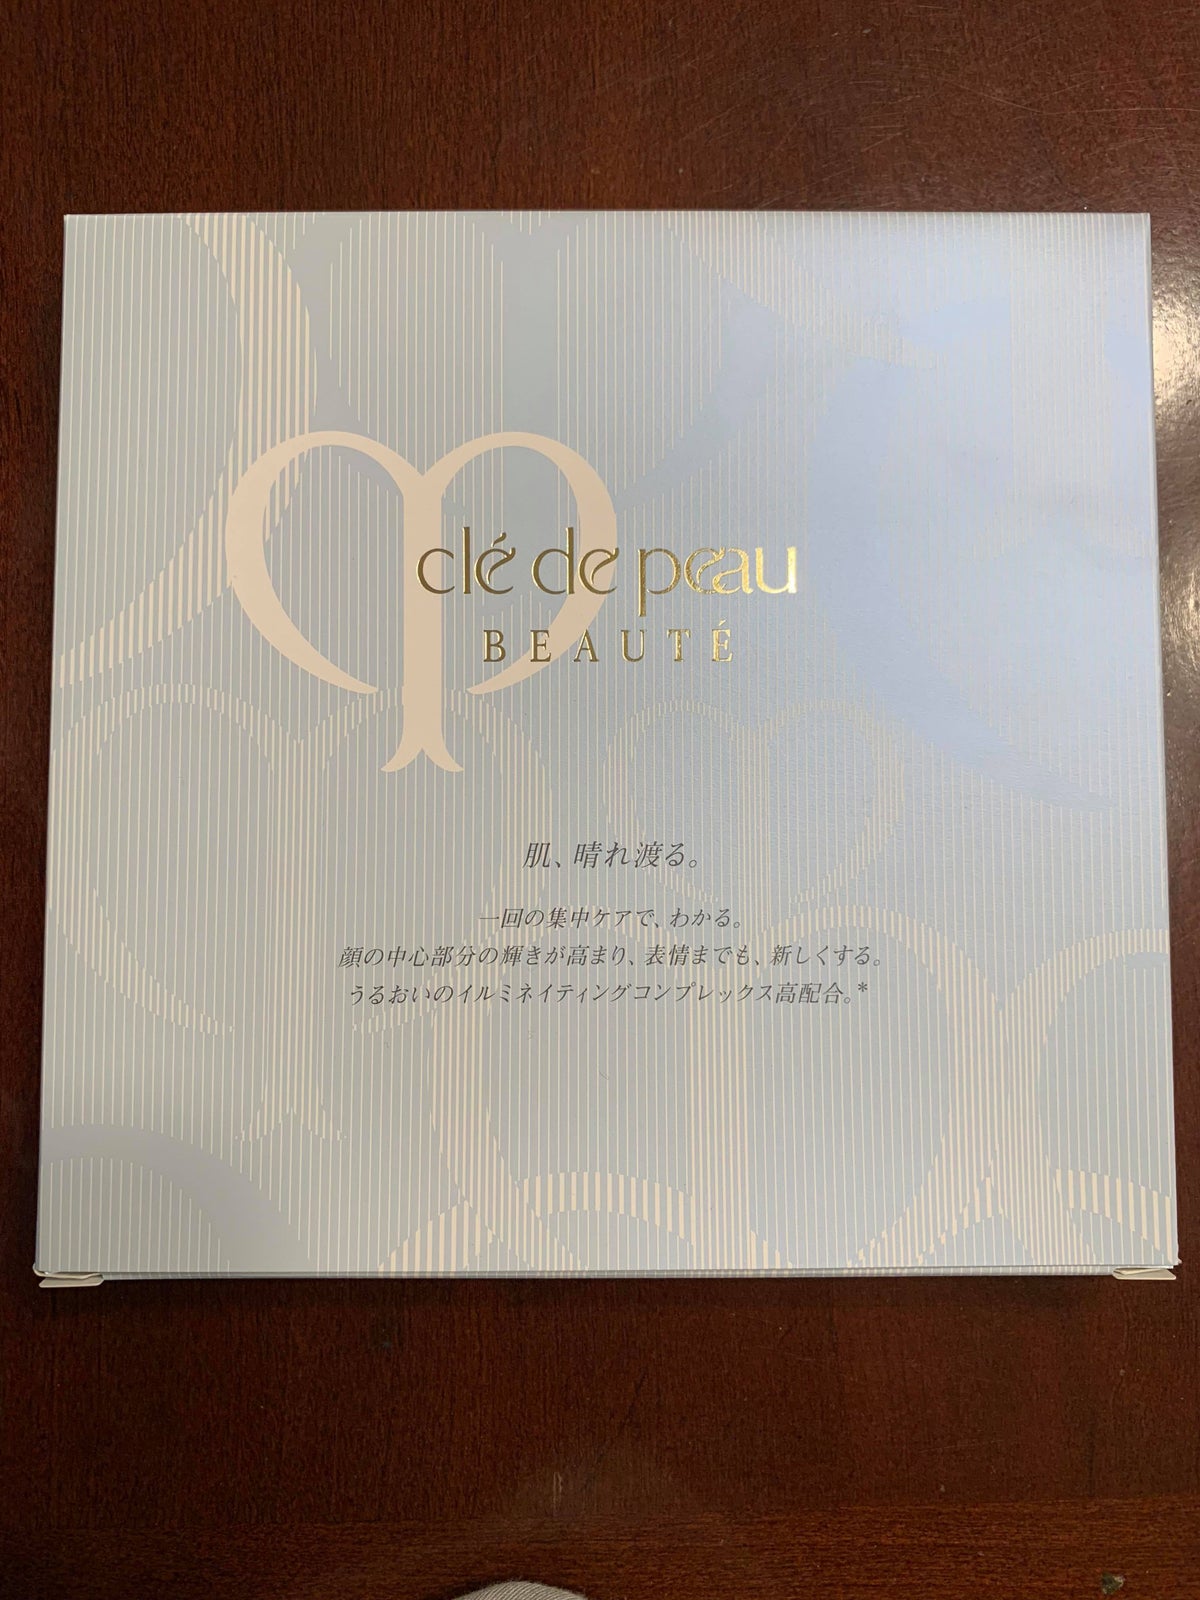 Japan Airlines 777 First Class Cle De Peau Illumenating Concentrate Skincare Kit